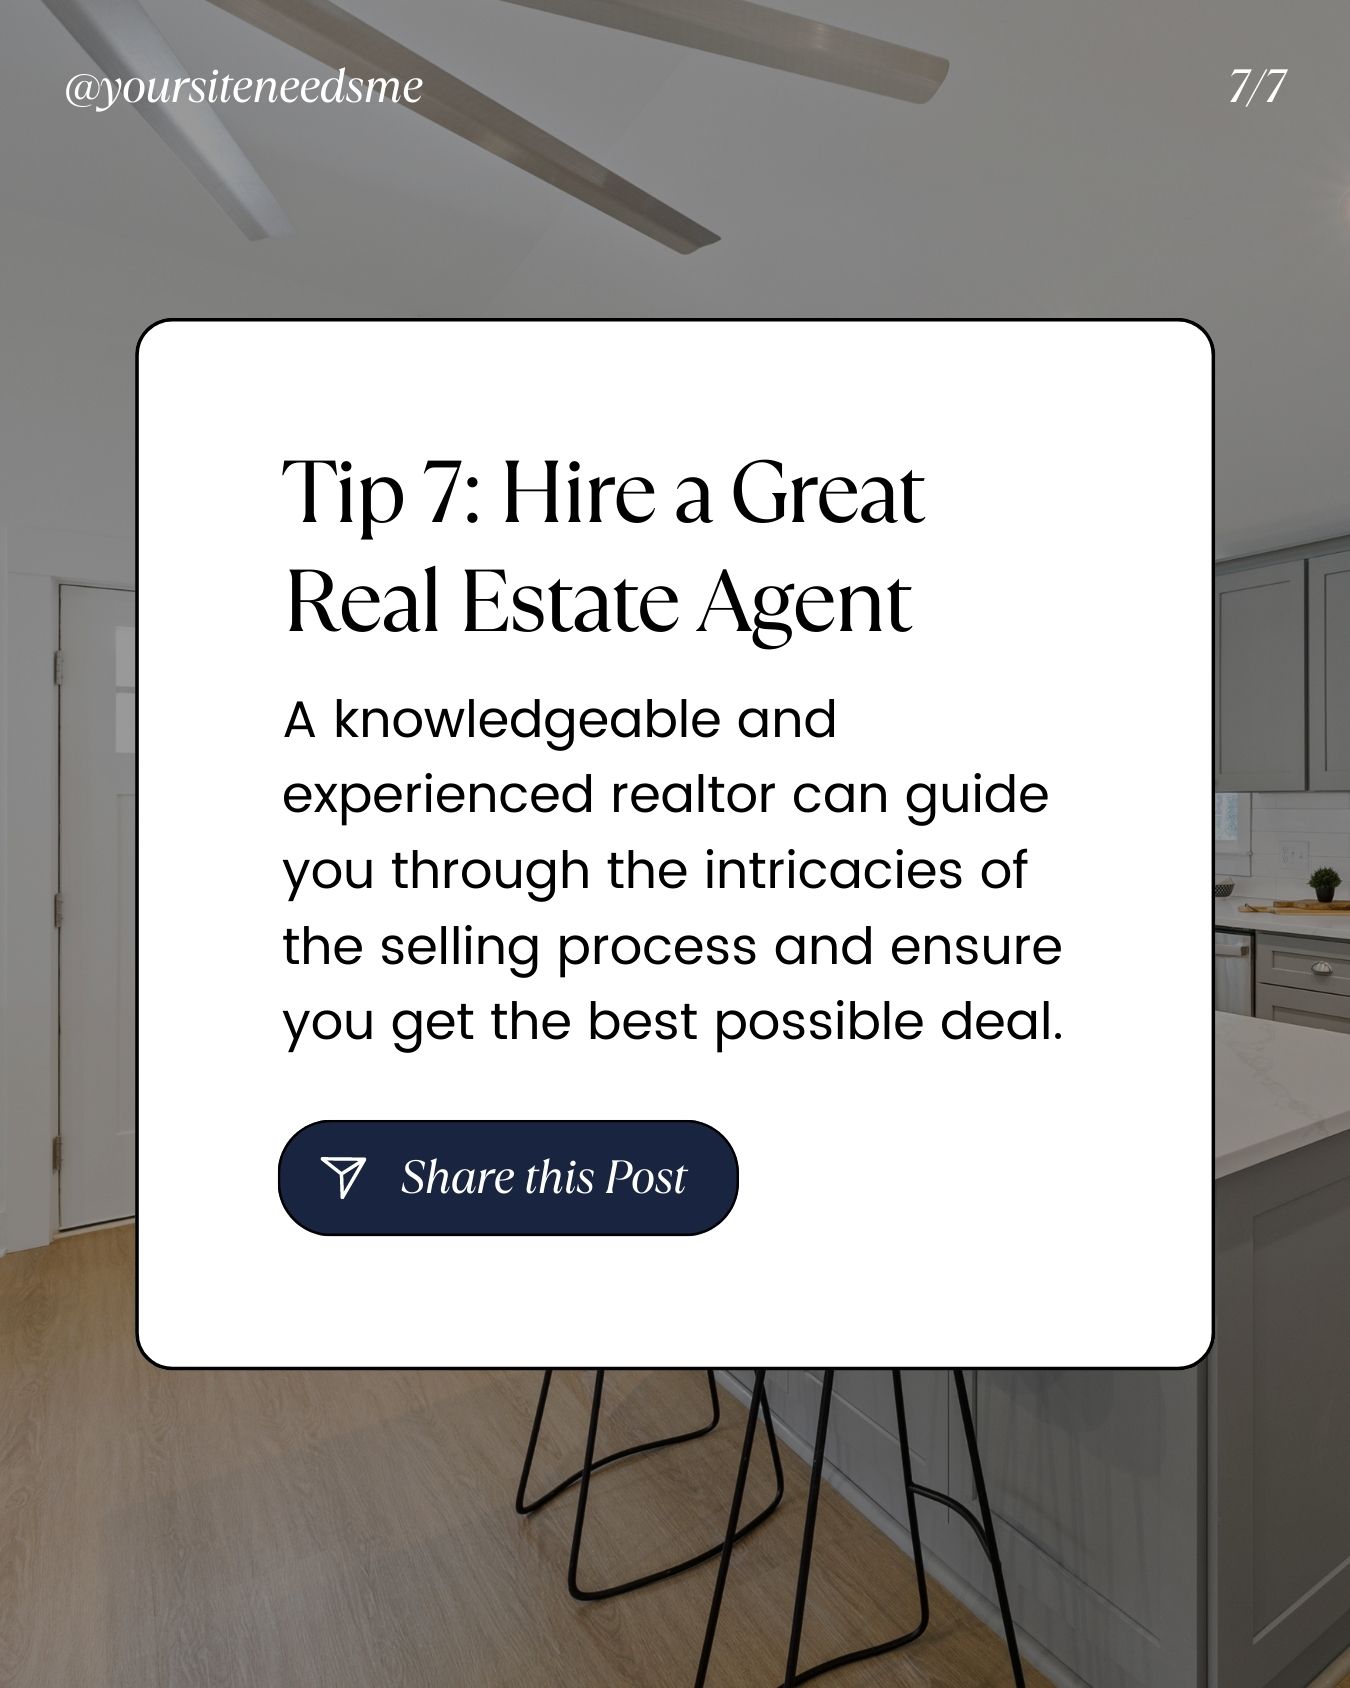 Tips to Sell Your Home 7 Hire a Great Real Estate Agent